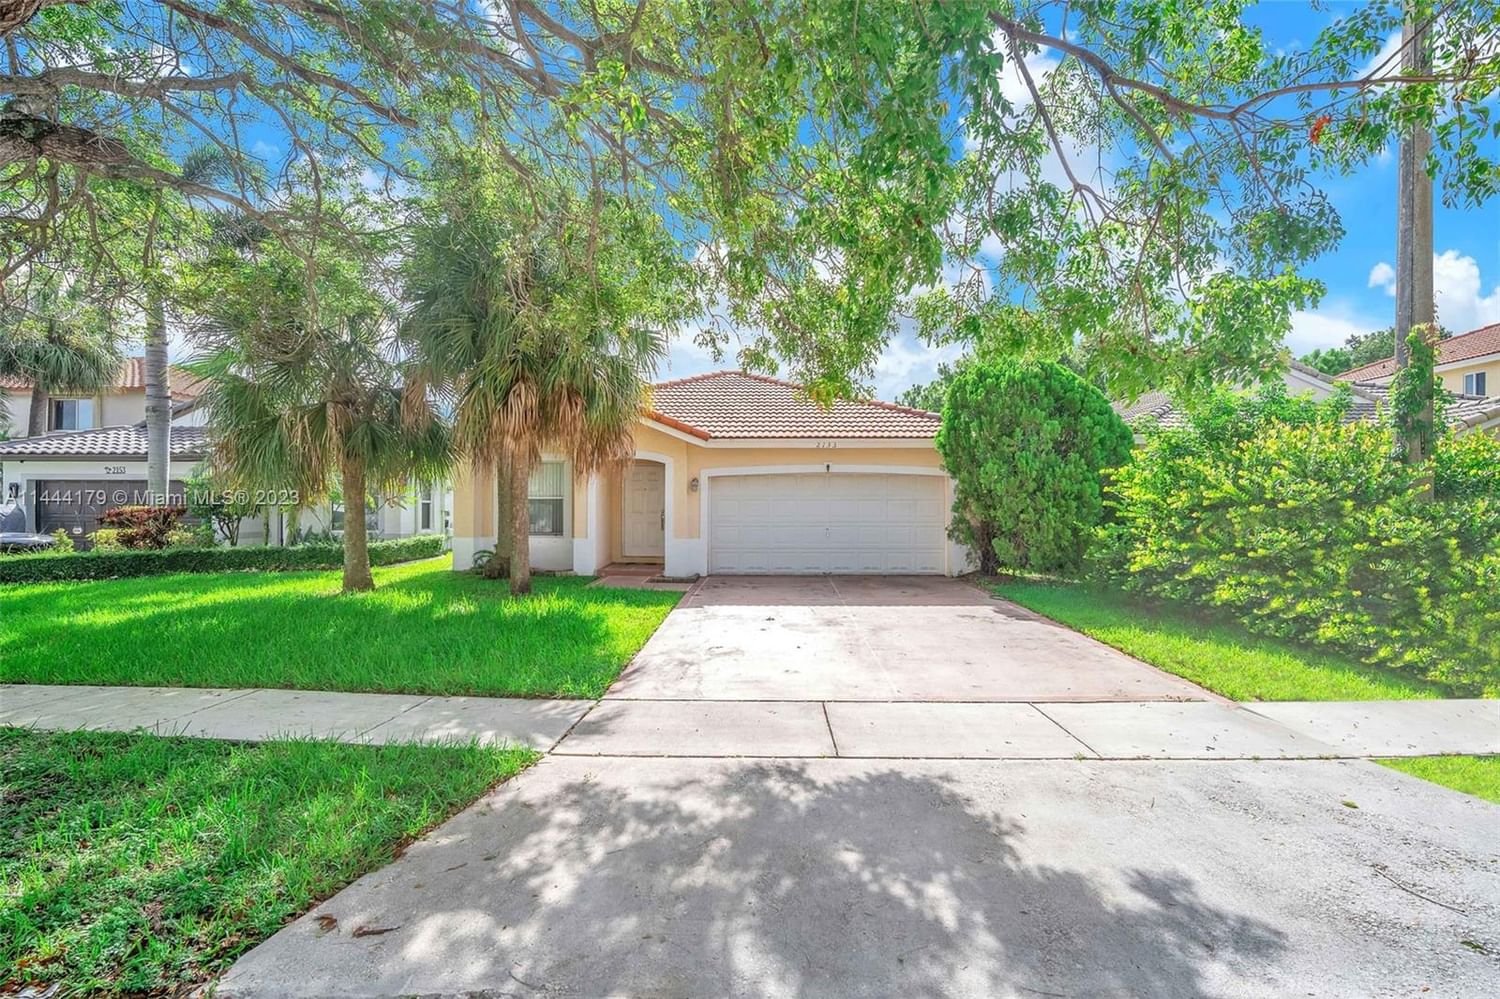 Real estate property located at 2133 208th Ter, Broward County, Pembroke Pines, FL